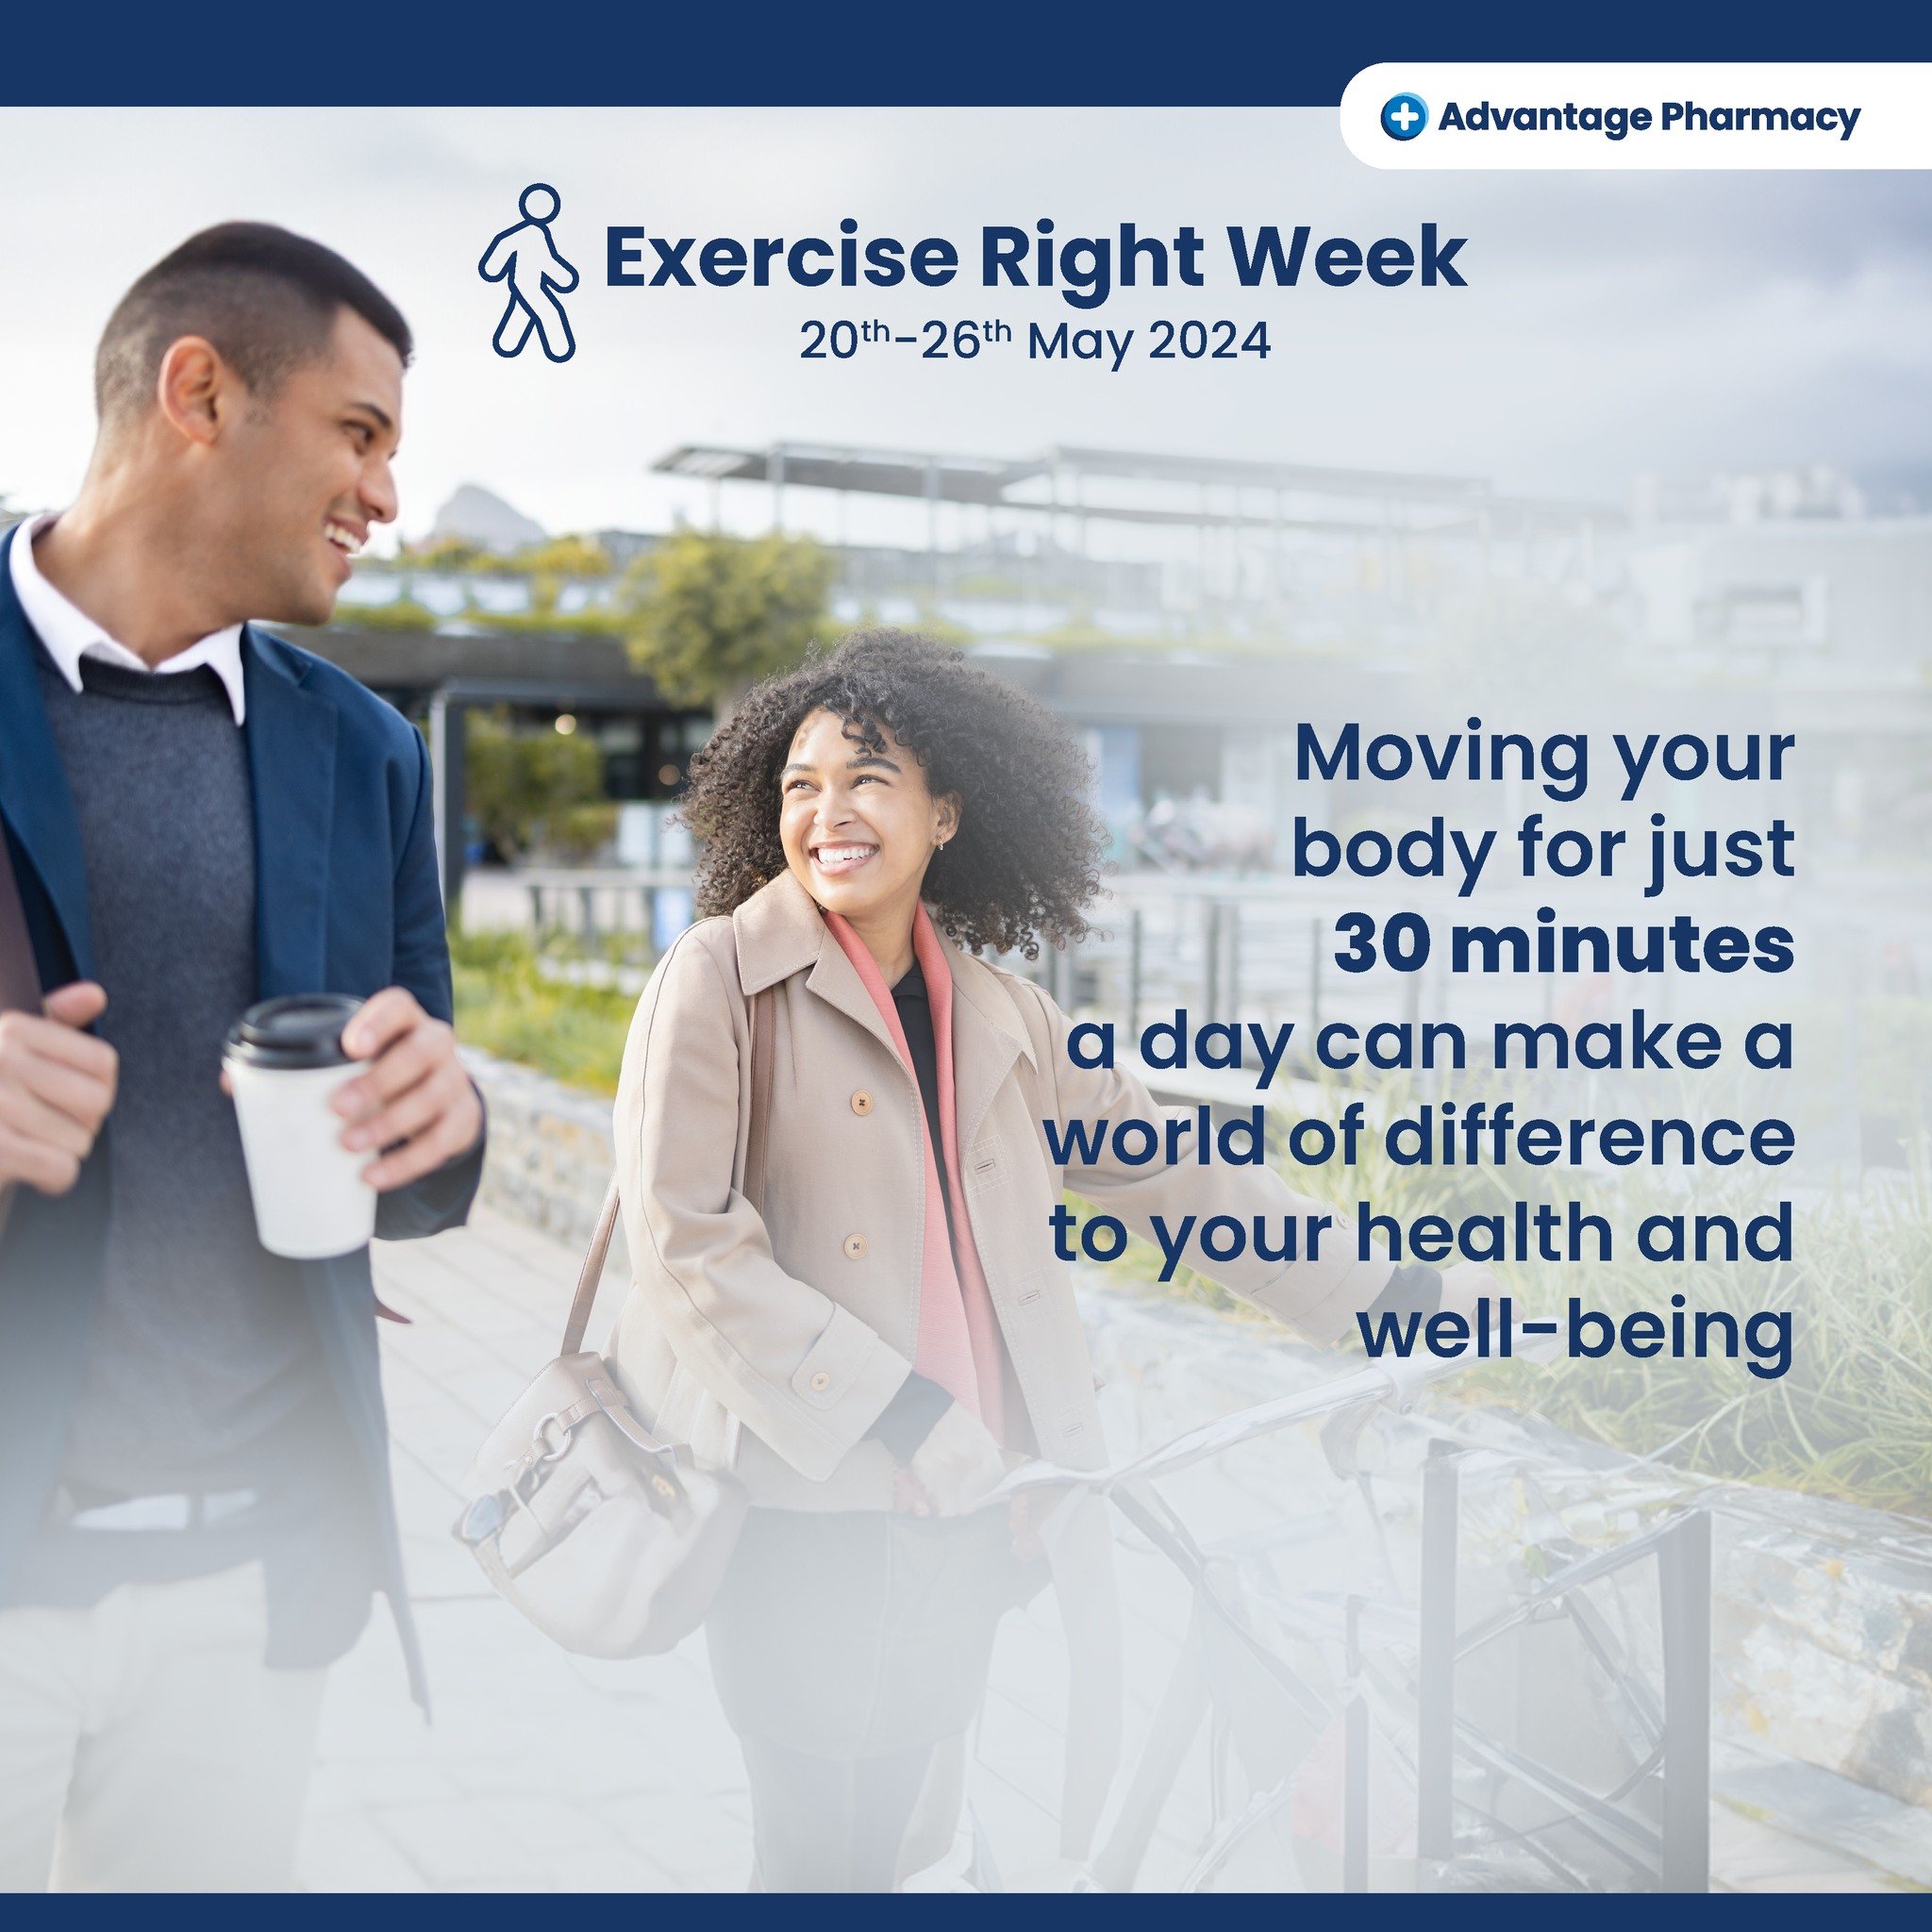 Exercise is an important part of your overall well-being! This Exercise Right Week, we are here to remind you of some simple ways you can incorporate exercise into your everyday routine. These could be as simple as walking to work or school, getting 